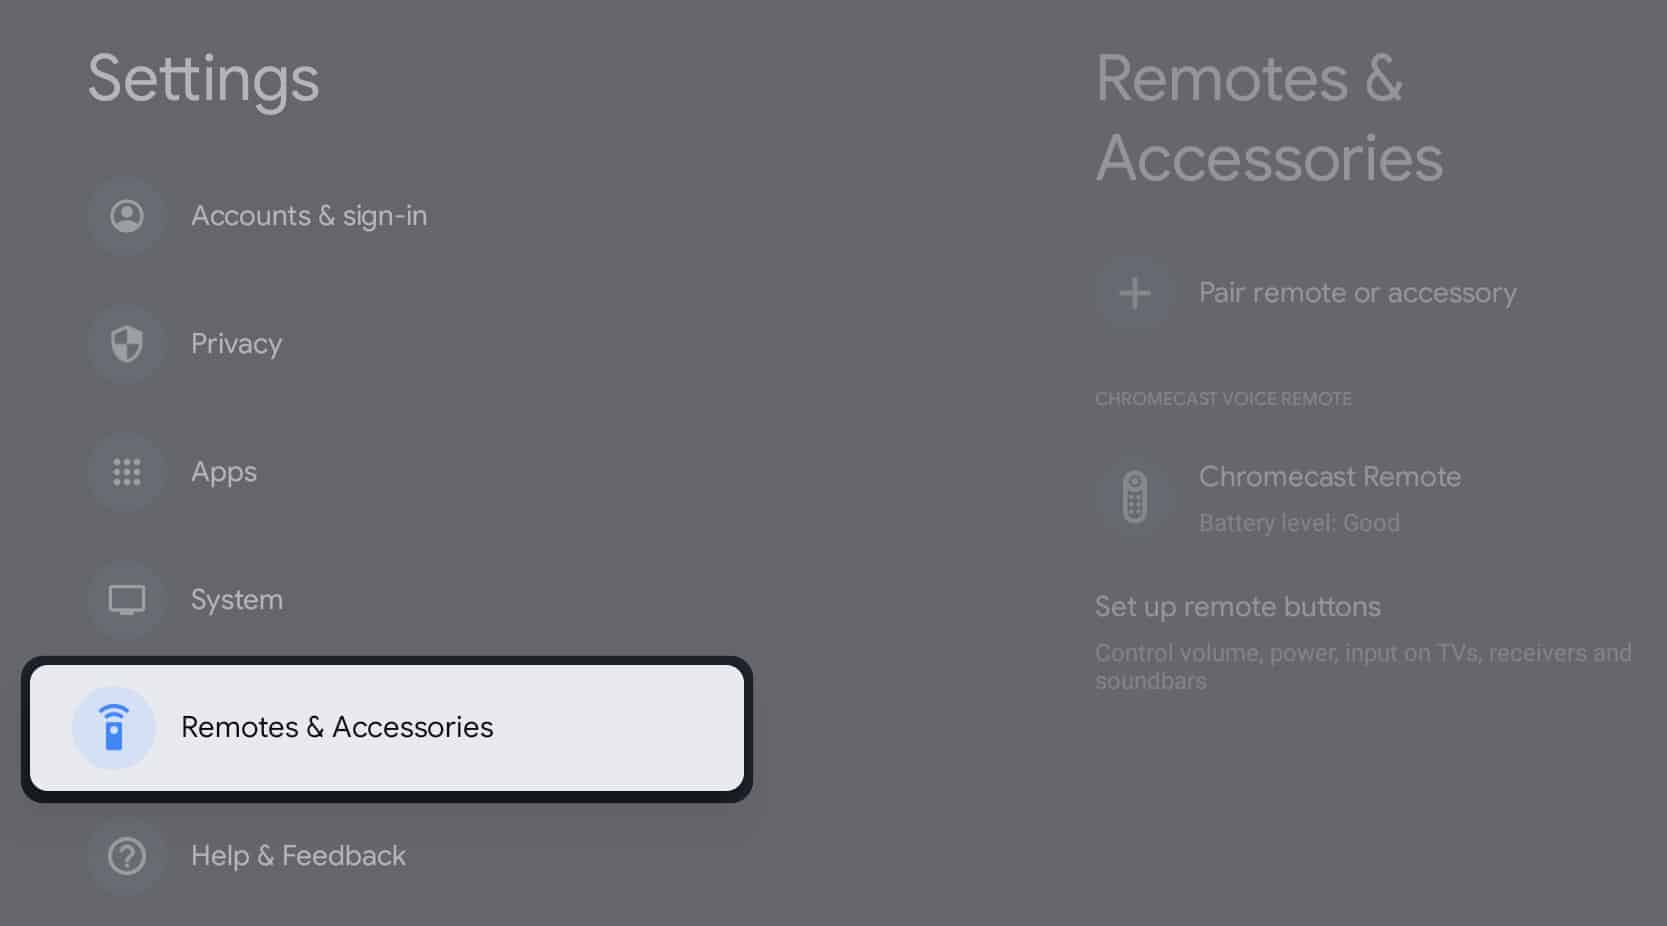 Select Remotes and Accessories